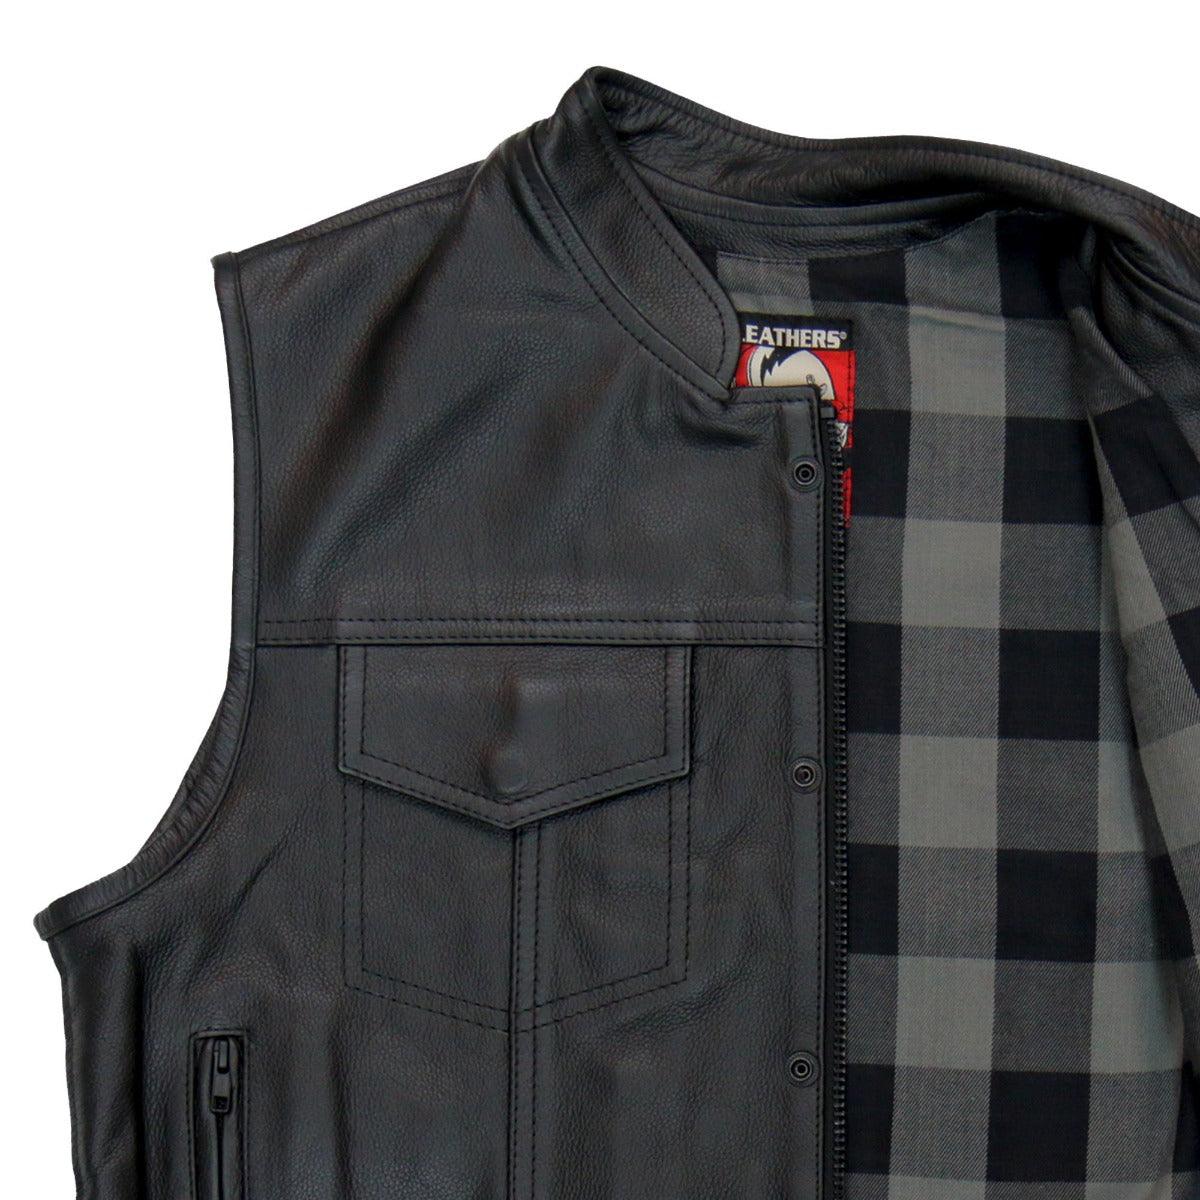 Hot Leathers Club Vest Flannel Gray Liner Carry Conceal - American Legend Rider